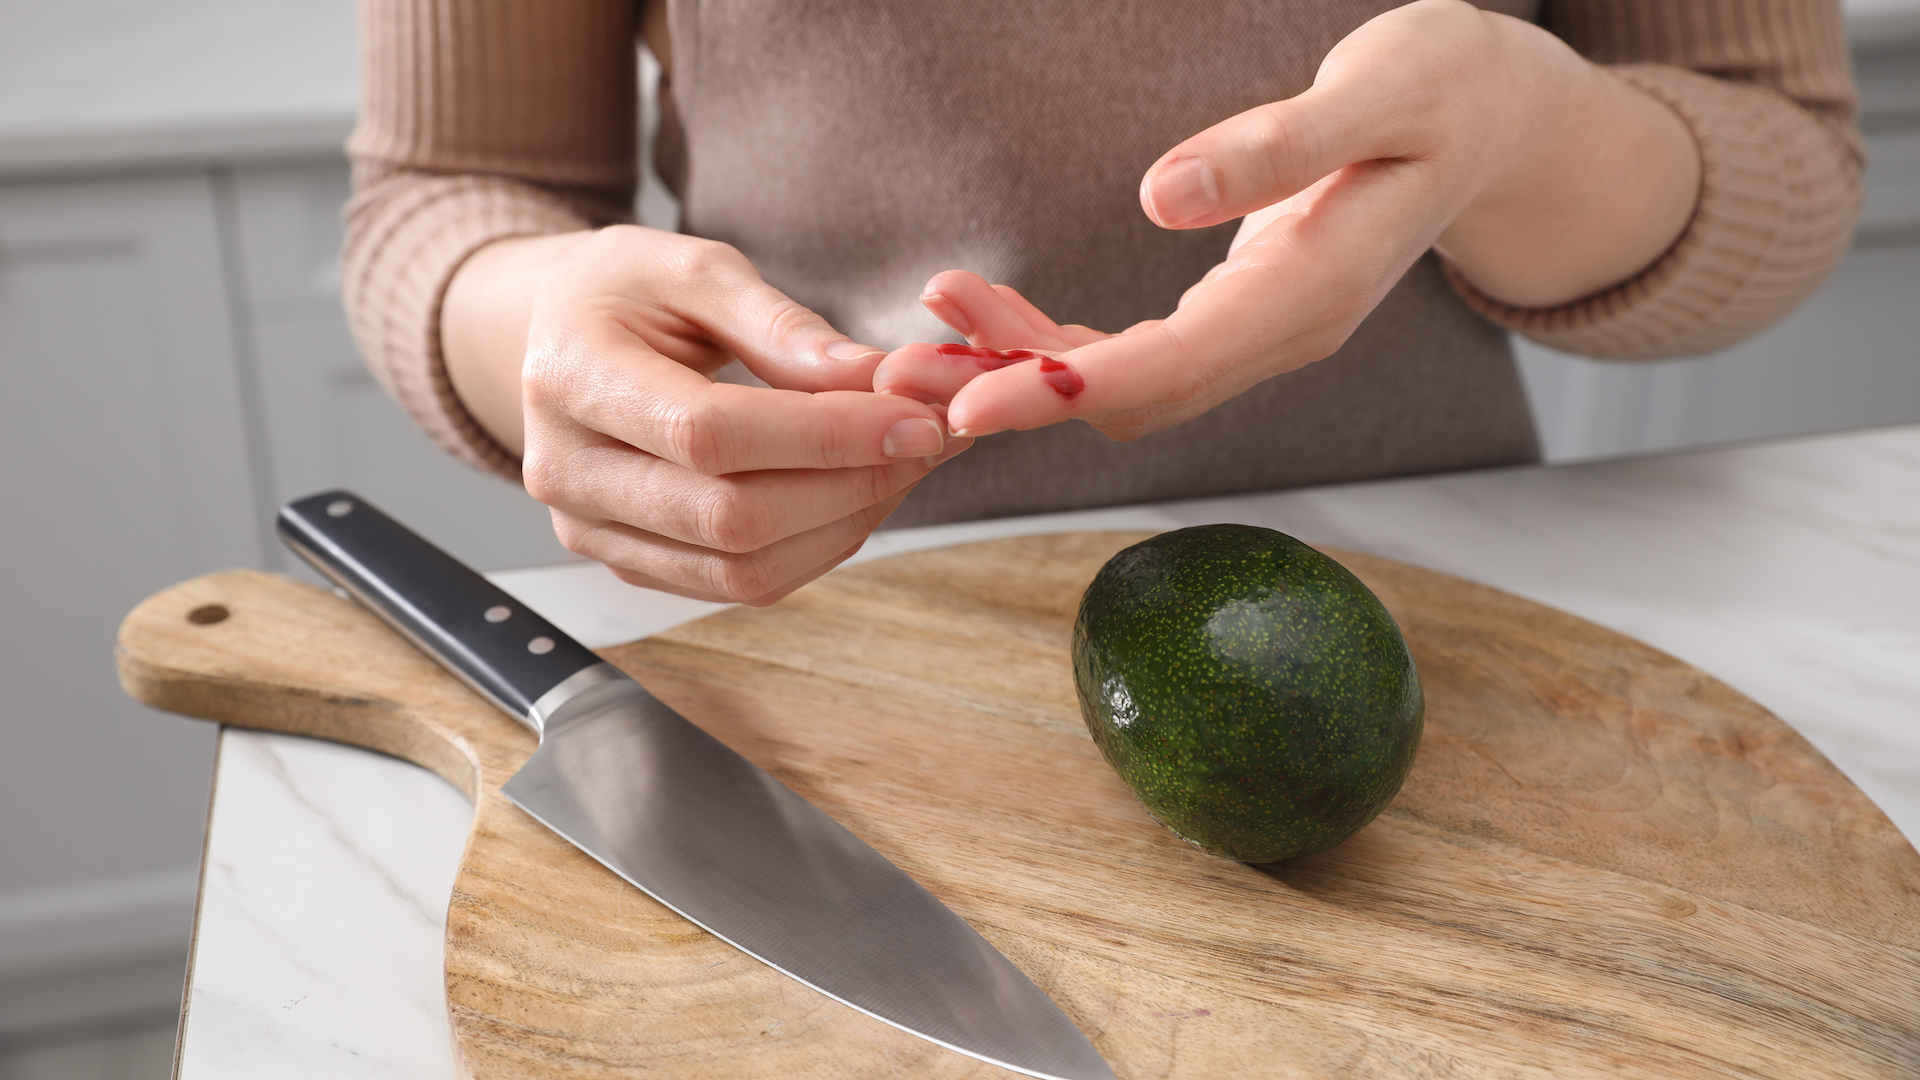 A photograph of a hand with a small cut next to a knife and cutting board.